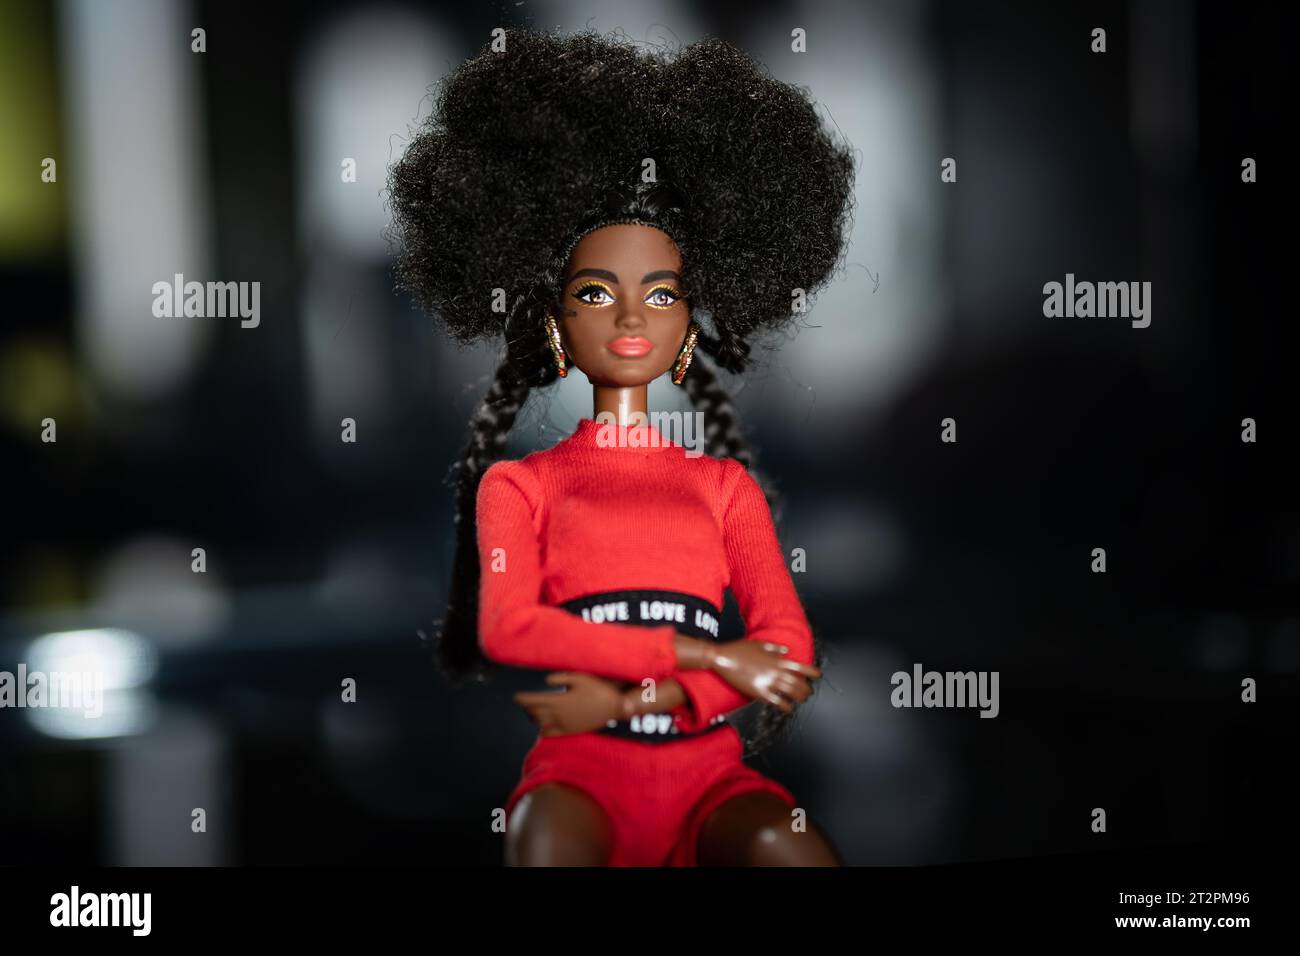 October 9, 2023. Barnaul, Russia: african american Barbie doll with black hair in a red suit standing on a dark background. Stock Photo